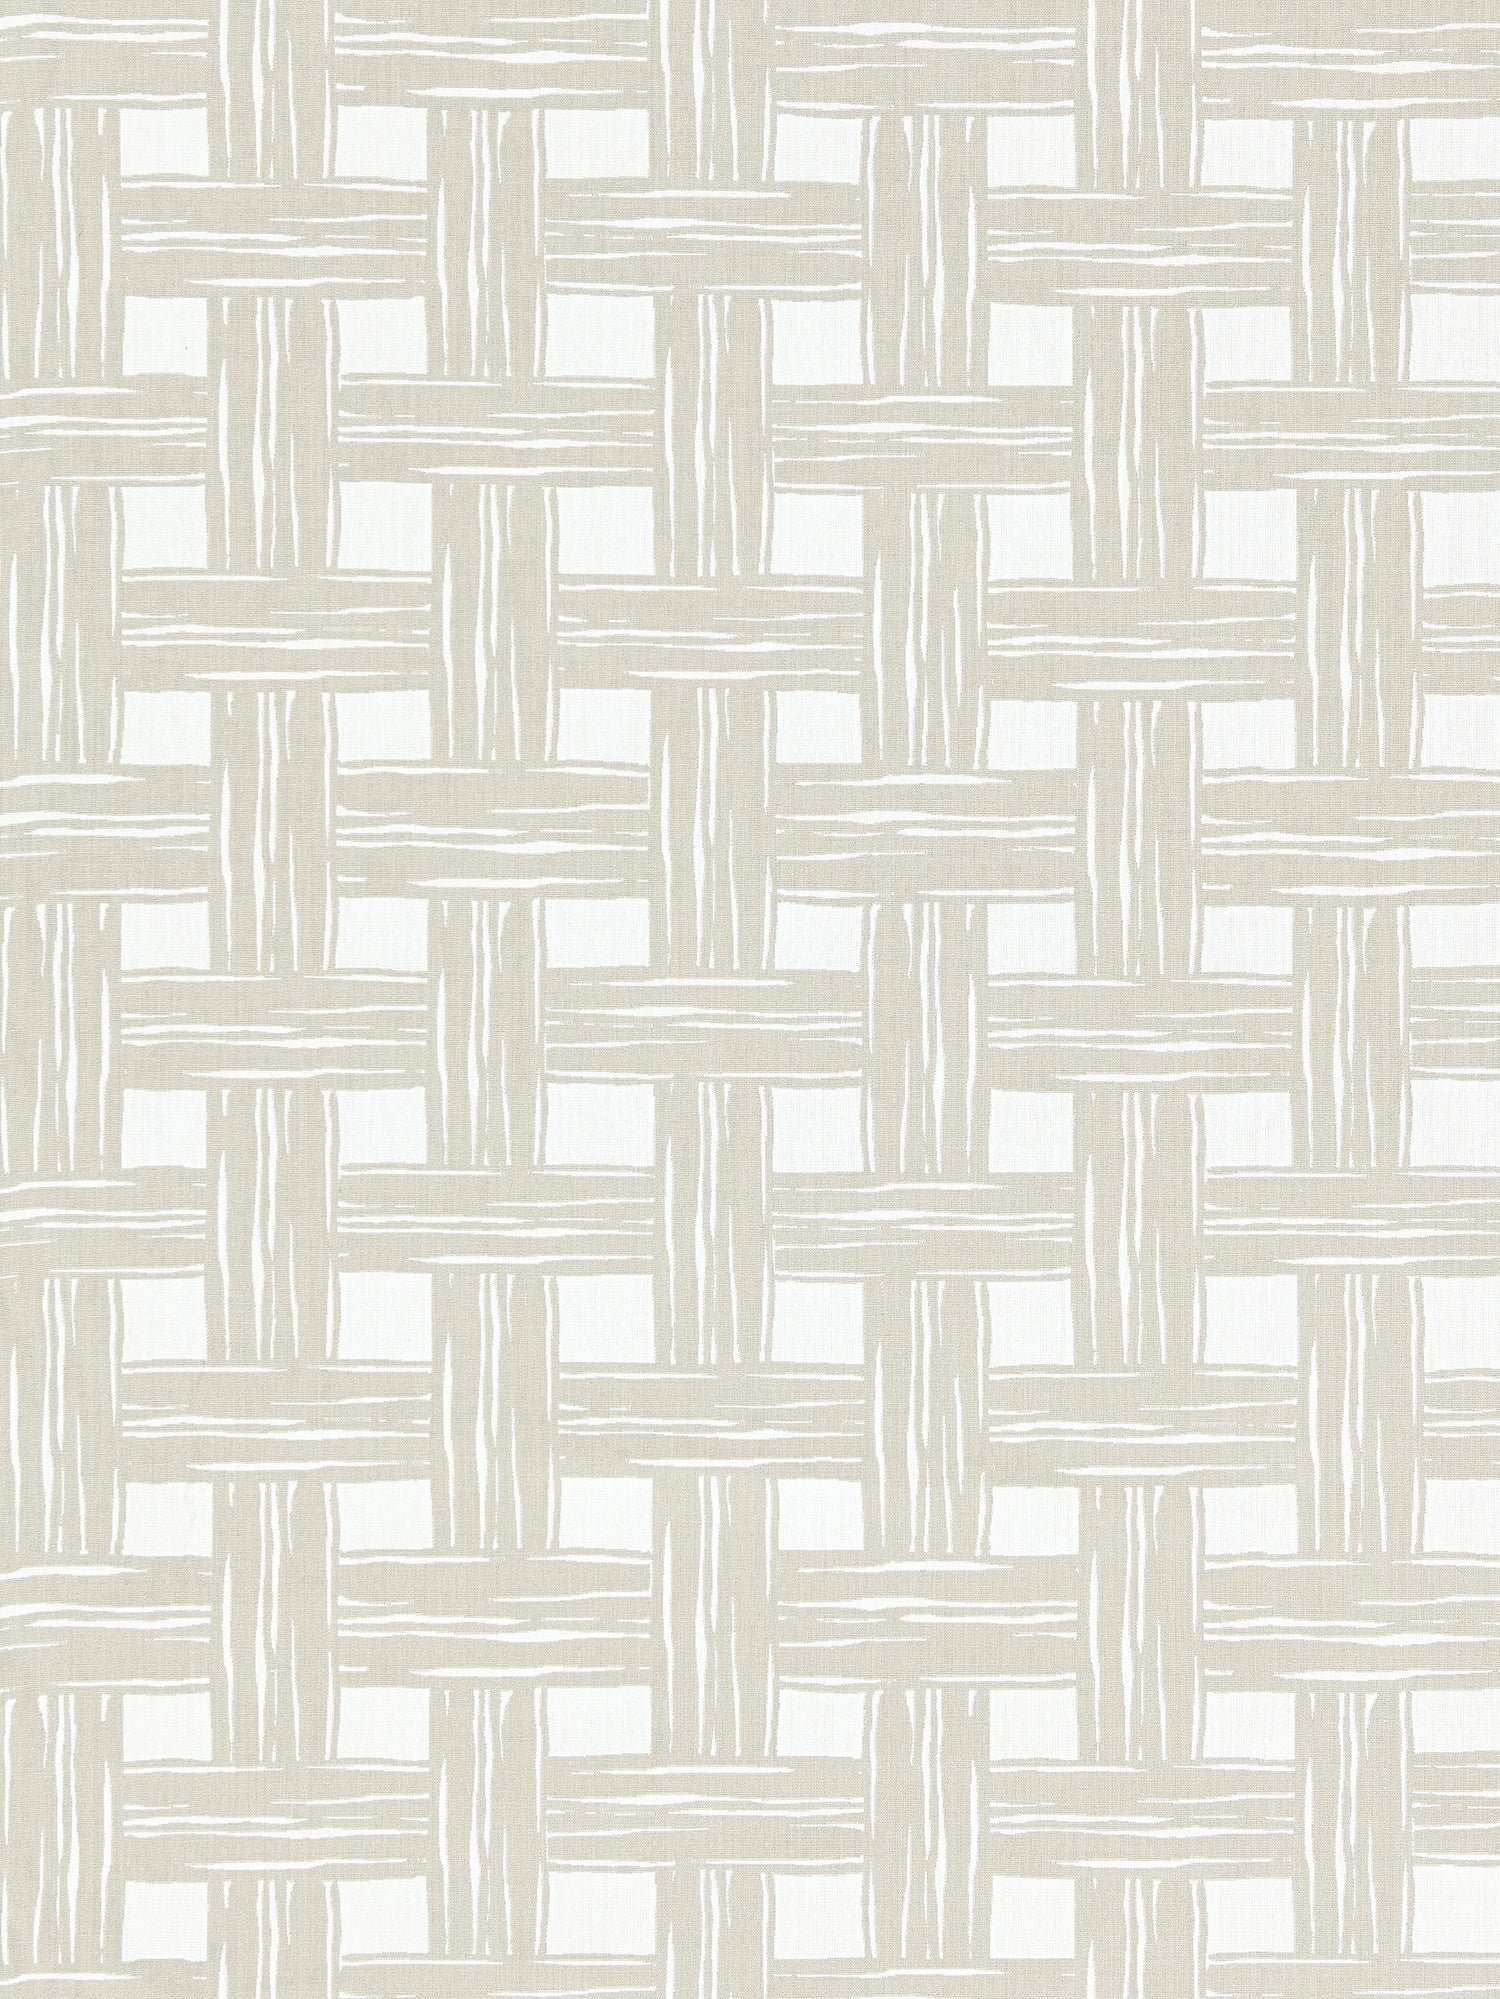 Bamboo Lattice fabric in sand color - pattern number SC 000127059 - by Scalamandre in the Scalamandre Fabrics Book 1 collection